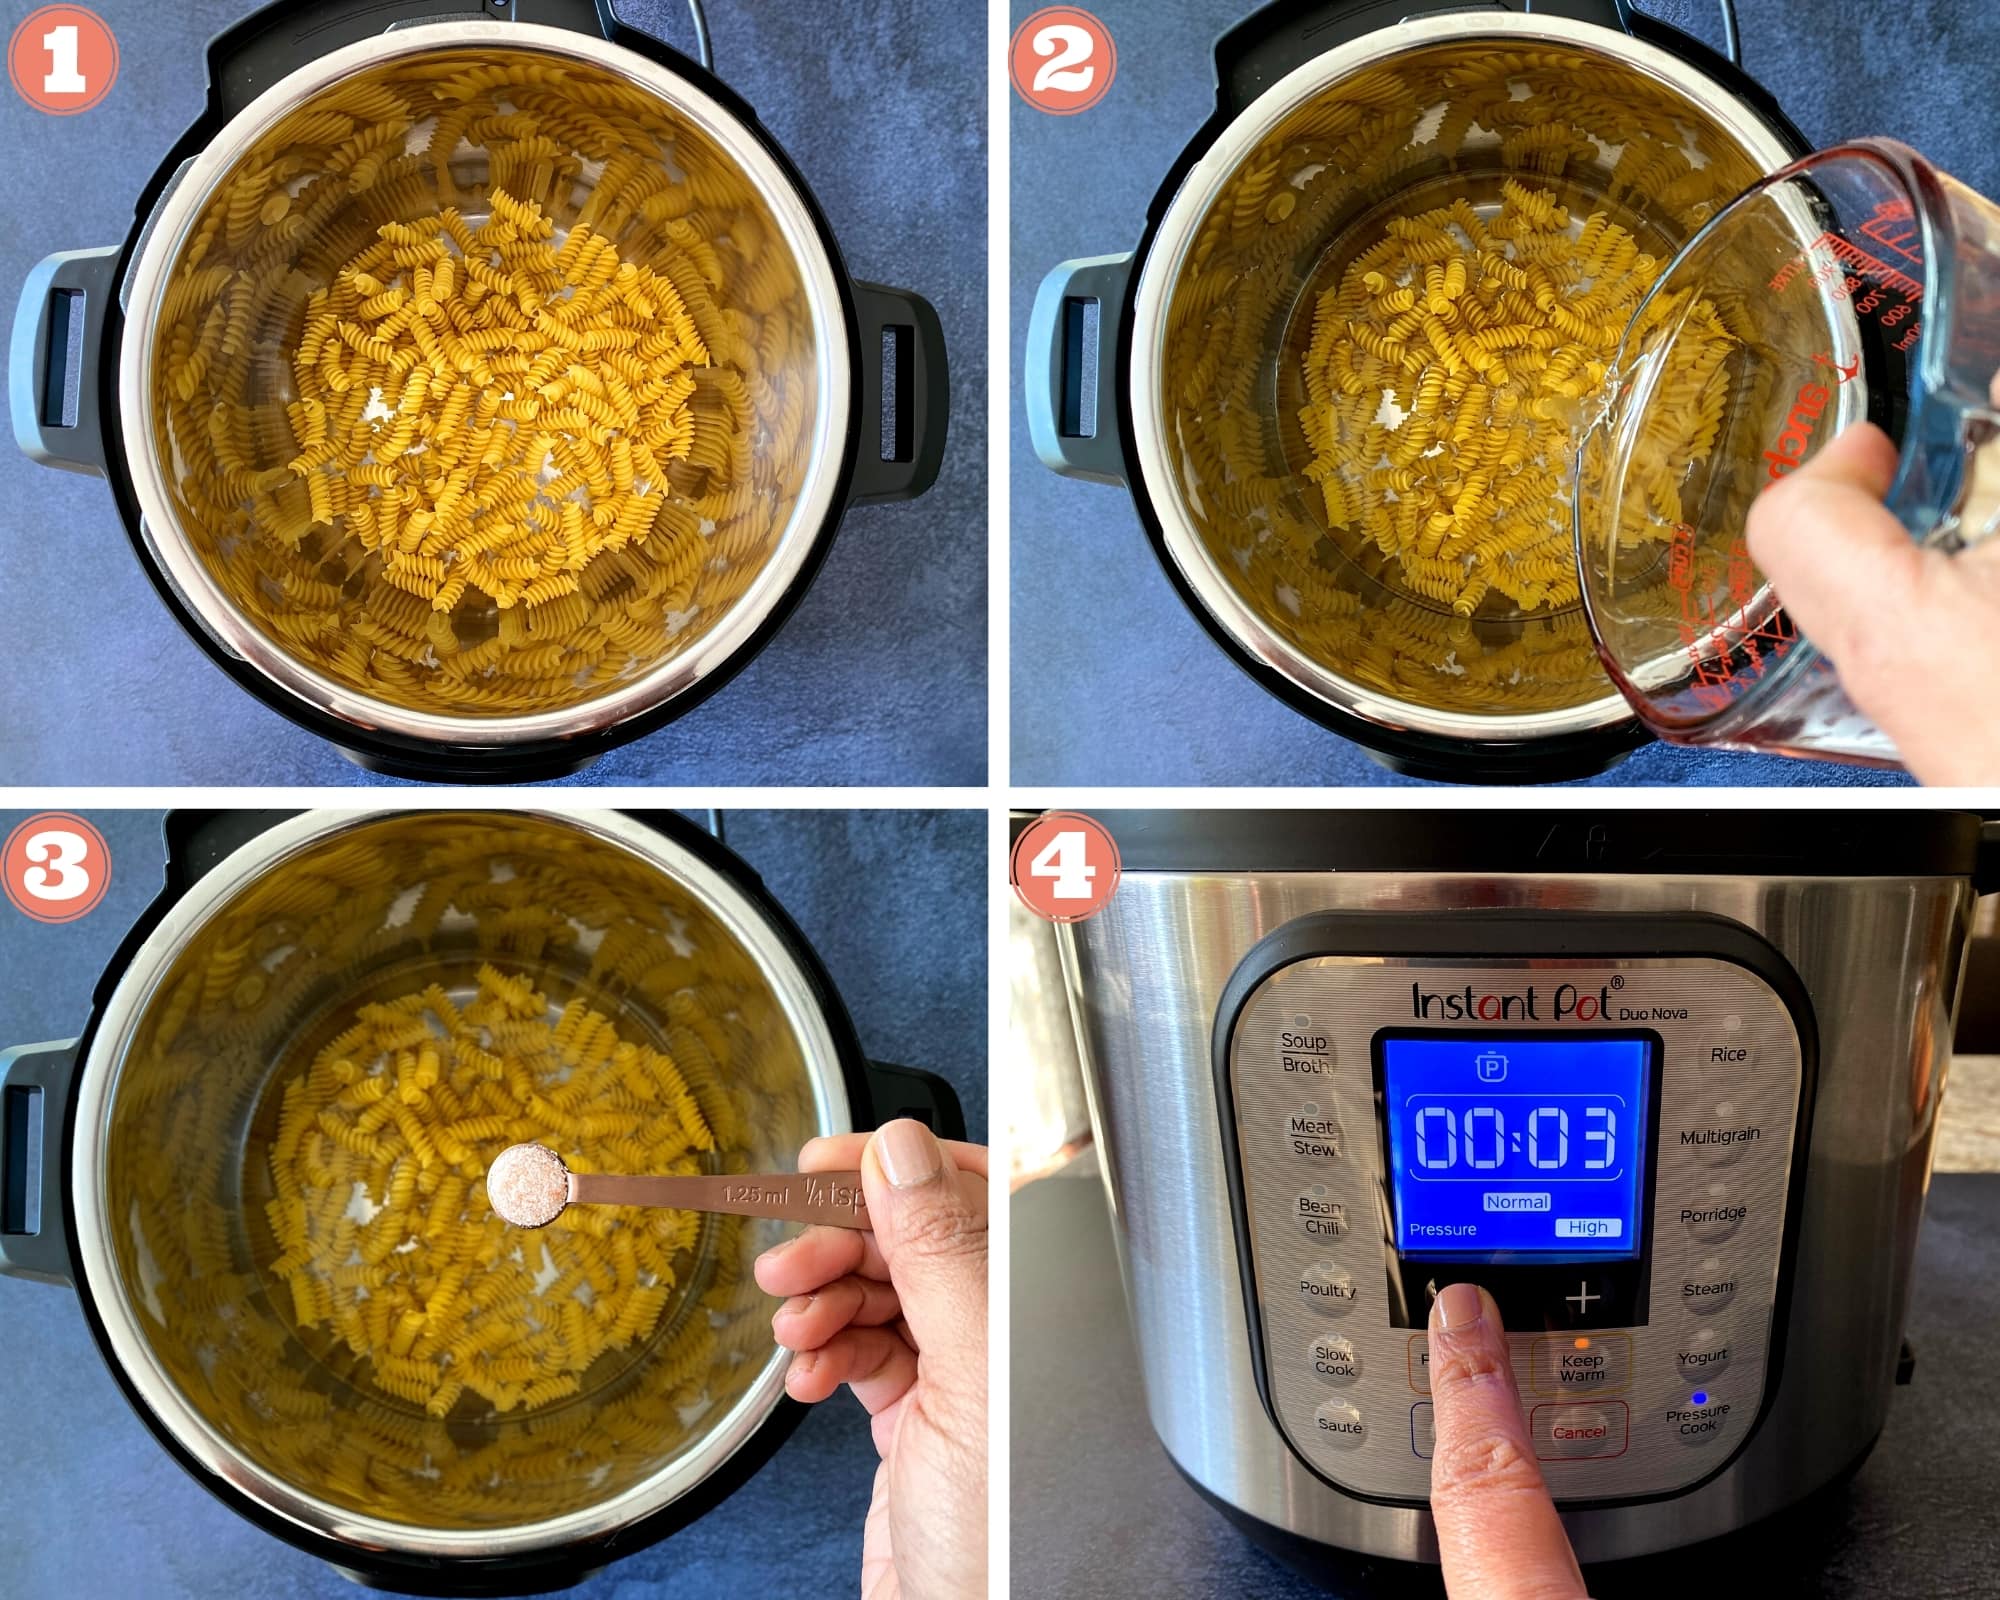 5 steps showing how to cook pasta in an instant pot